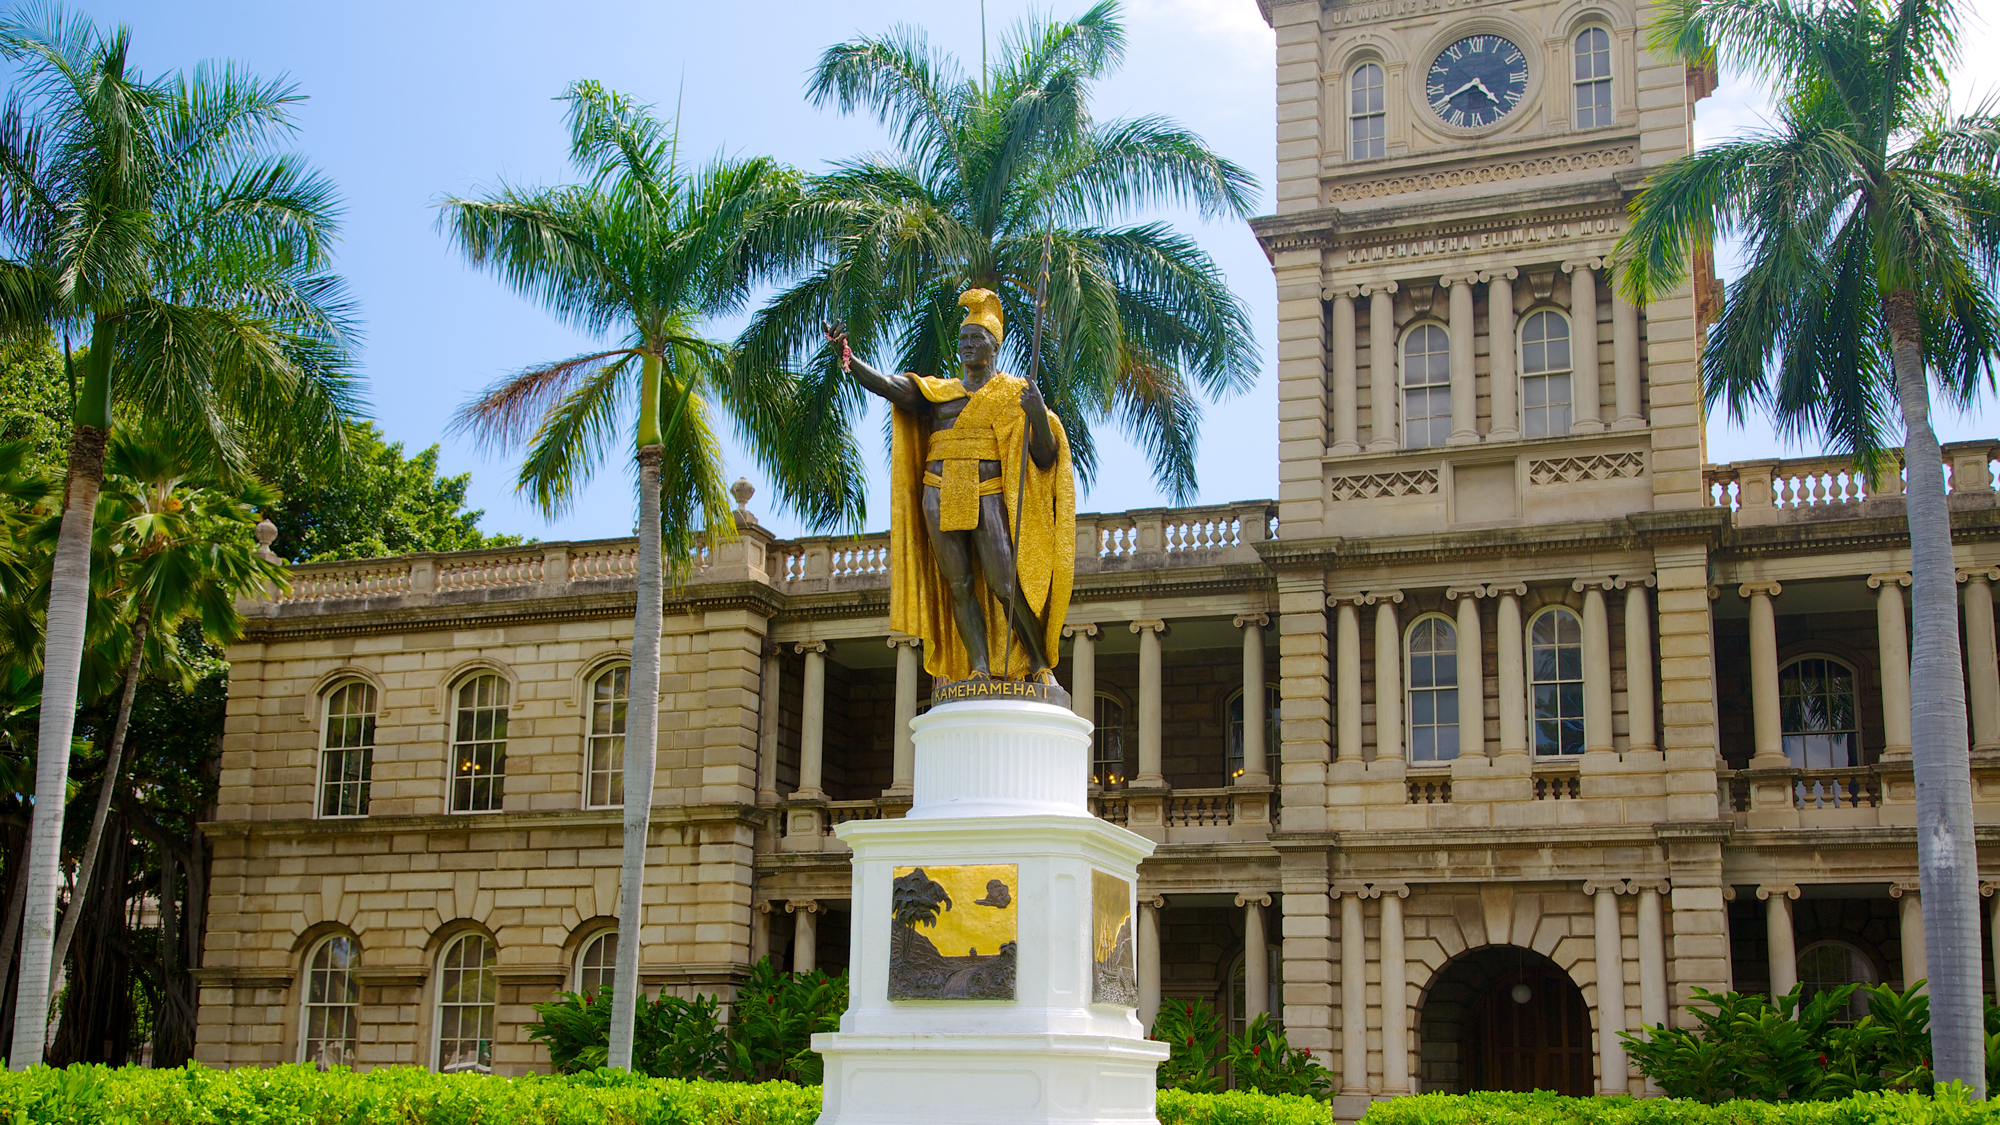 Iolani Palace in Honolulu, Hawaii is one of the true castles in the US